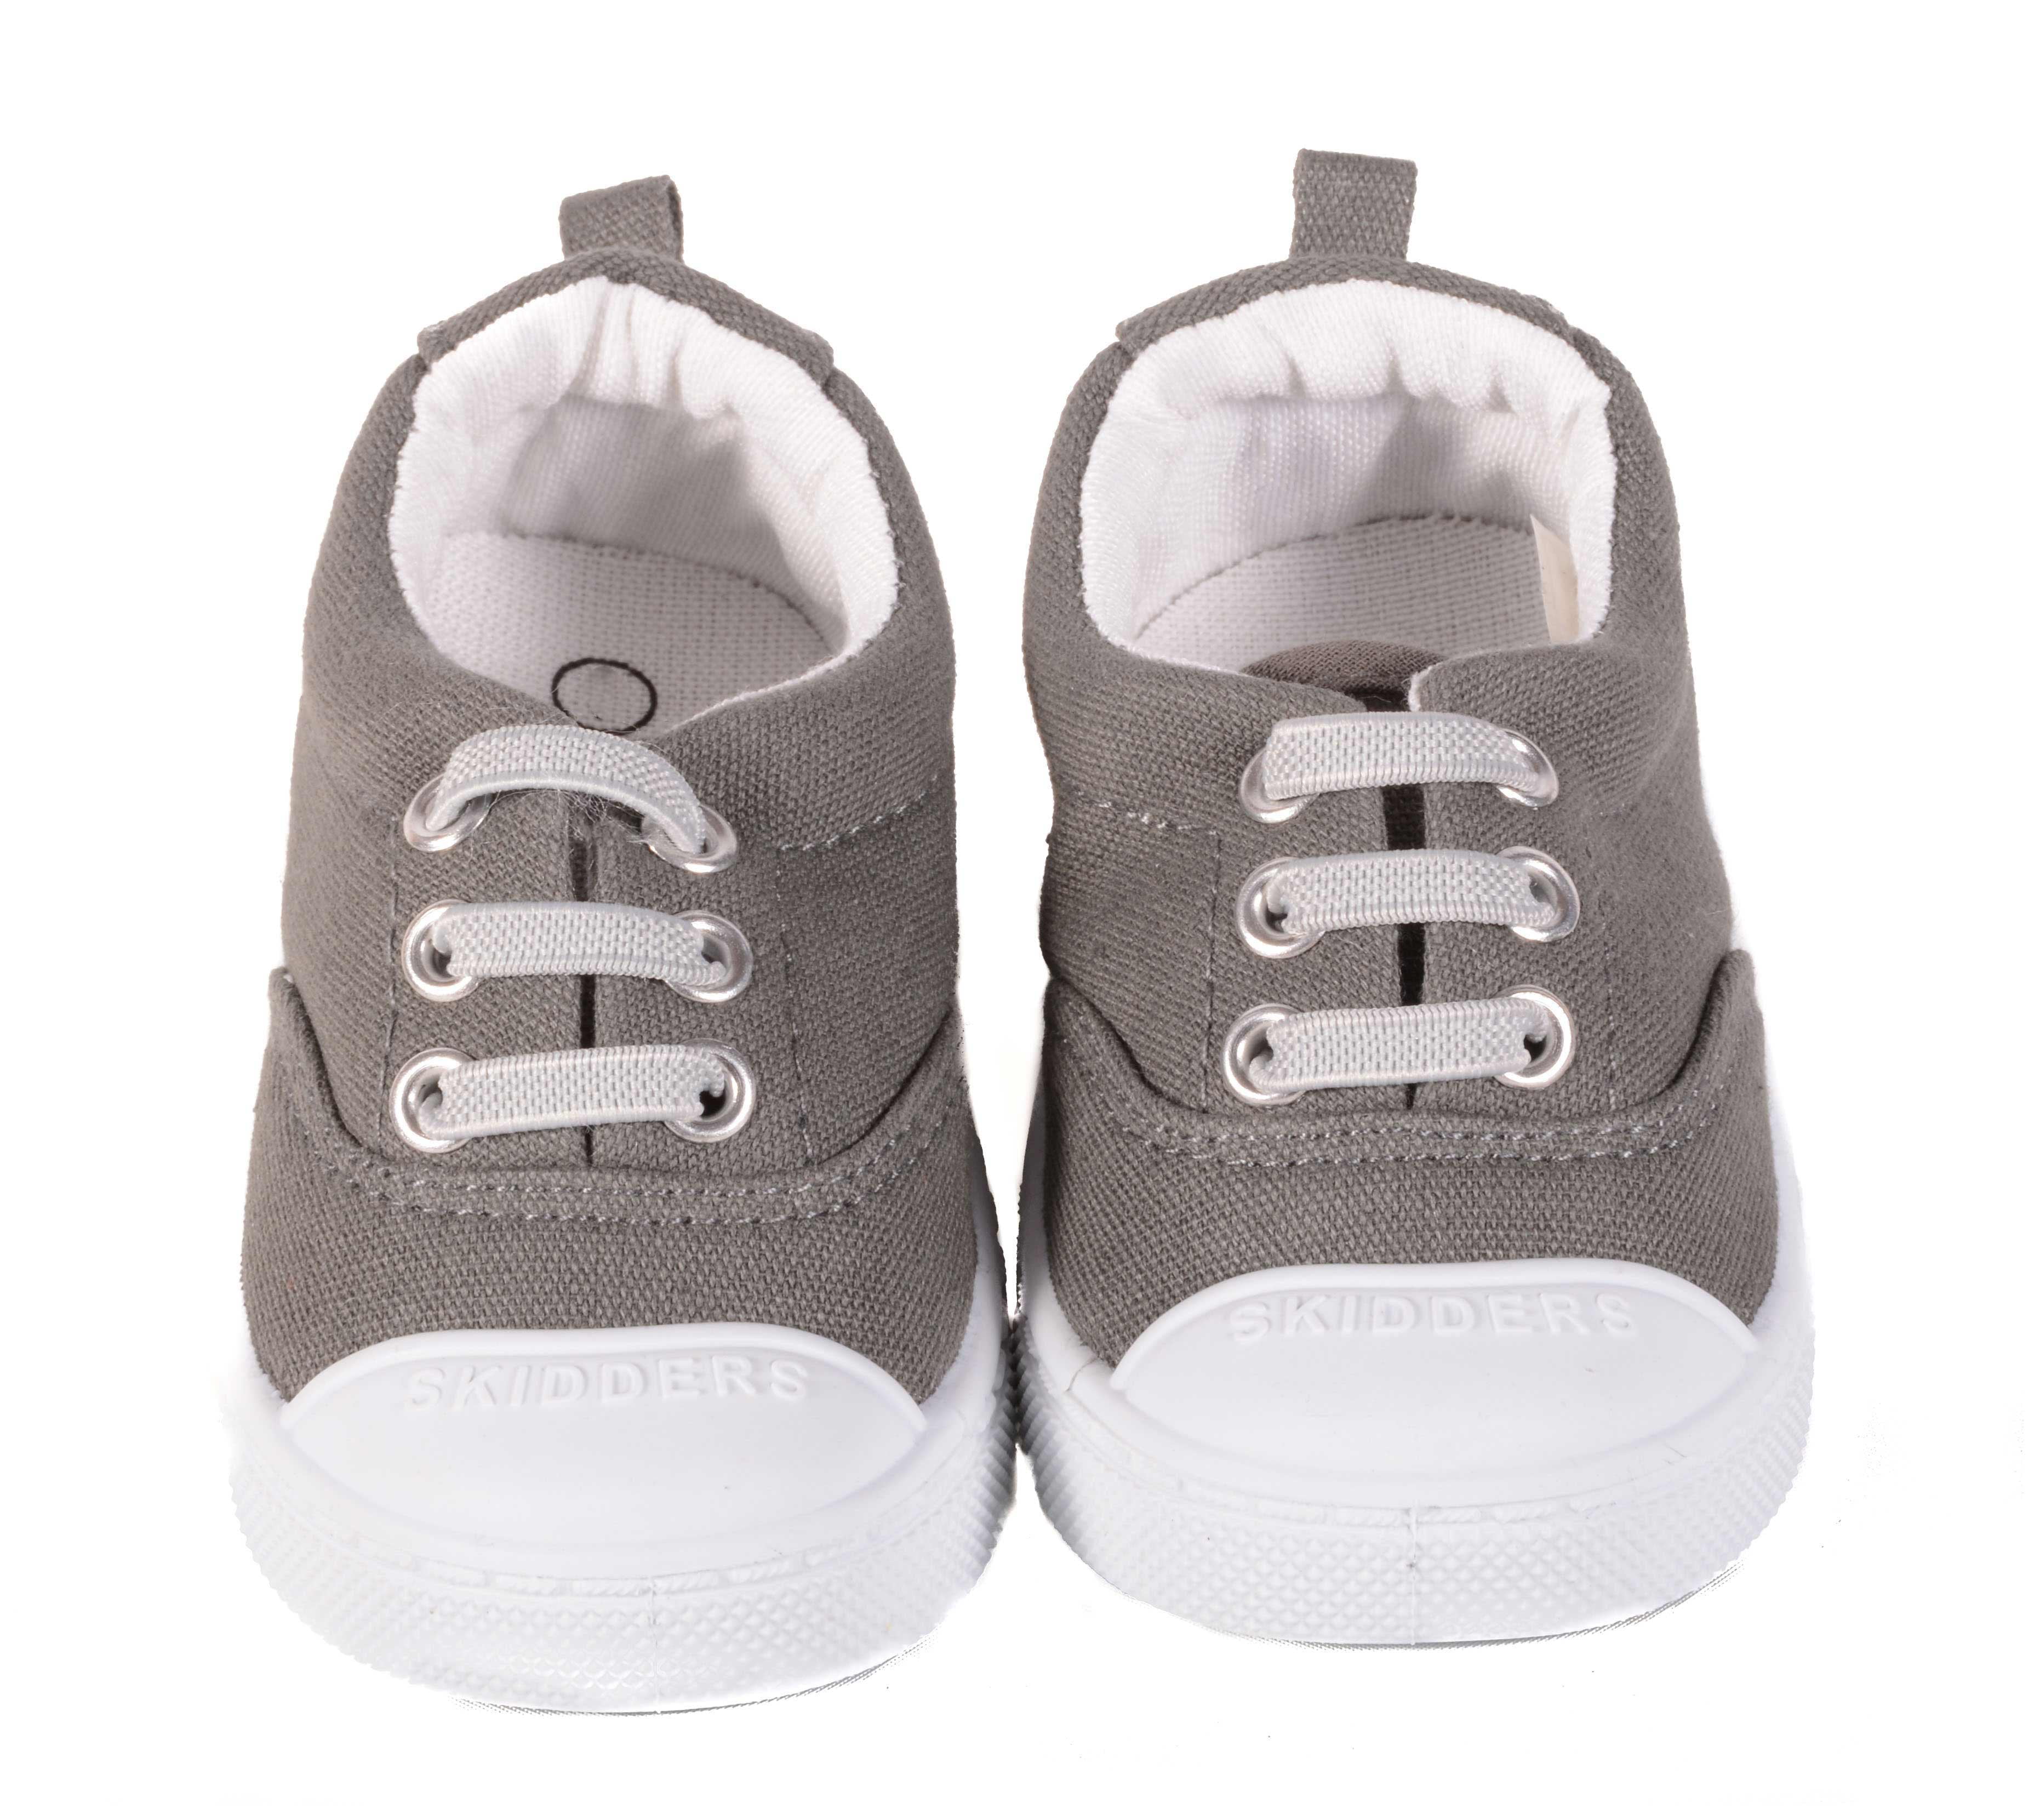 Skidders Canvas Baby Toddler Boys Shoes Style SK1011 Size 2 - 12 months ...